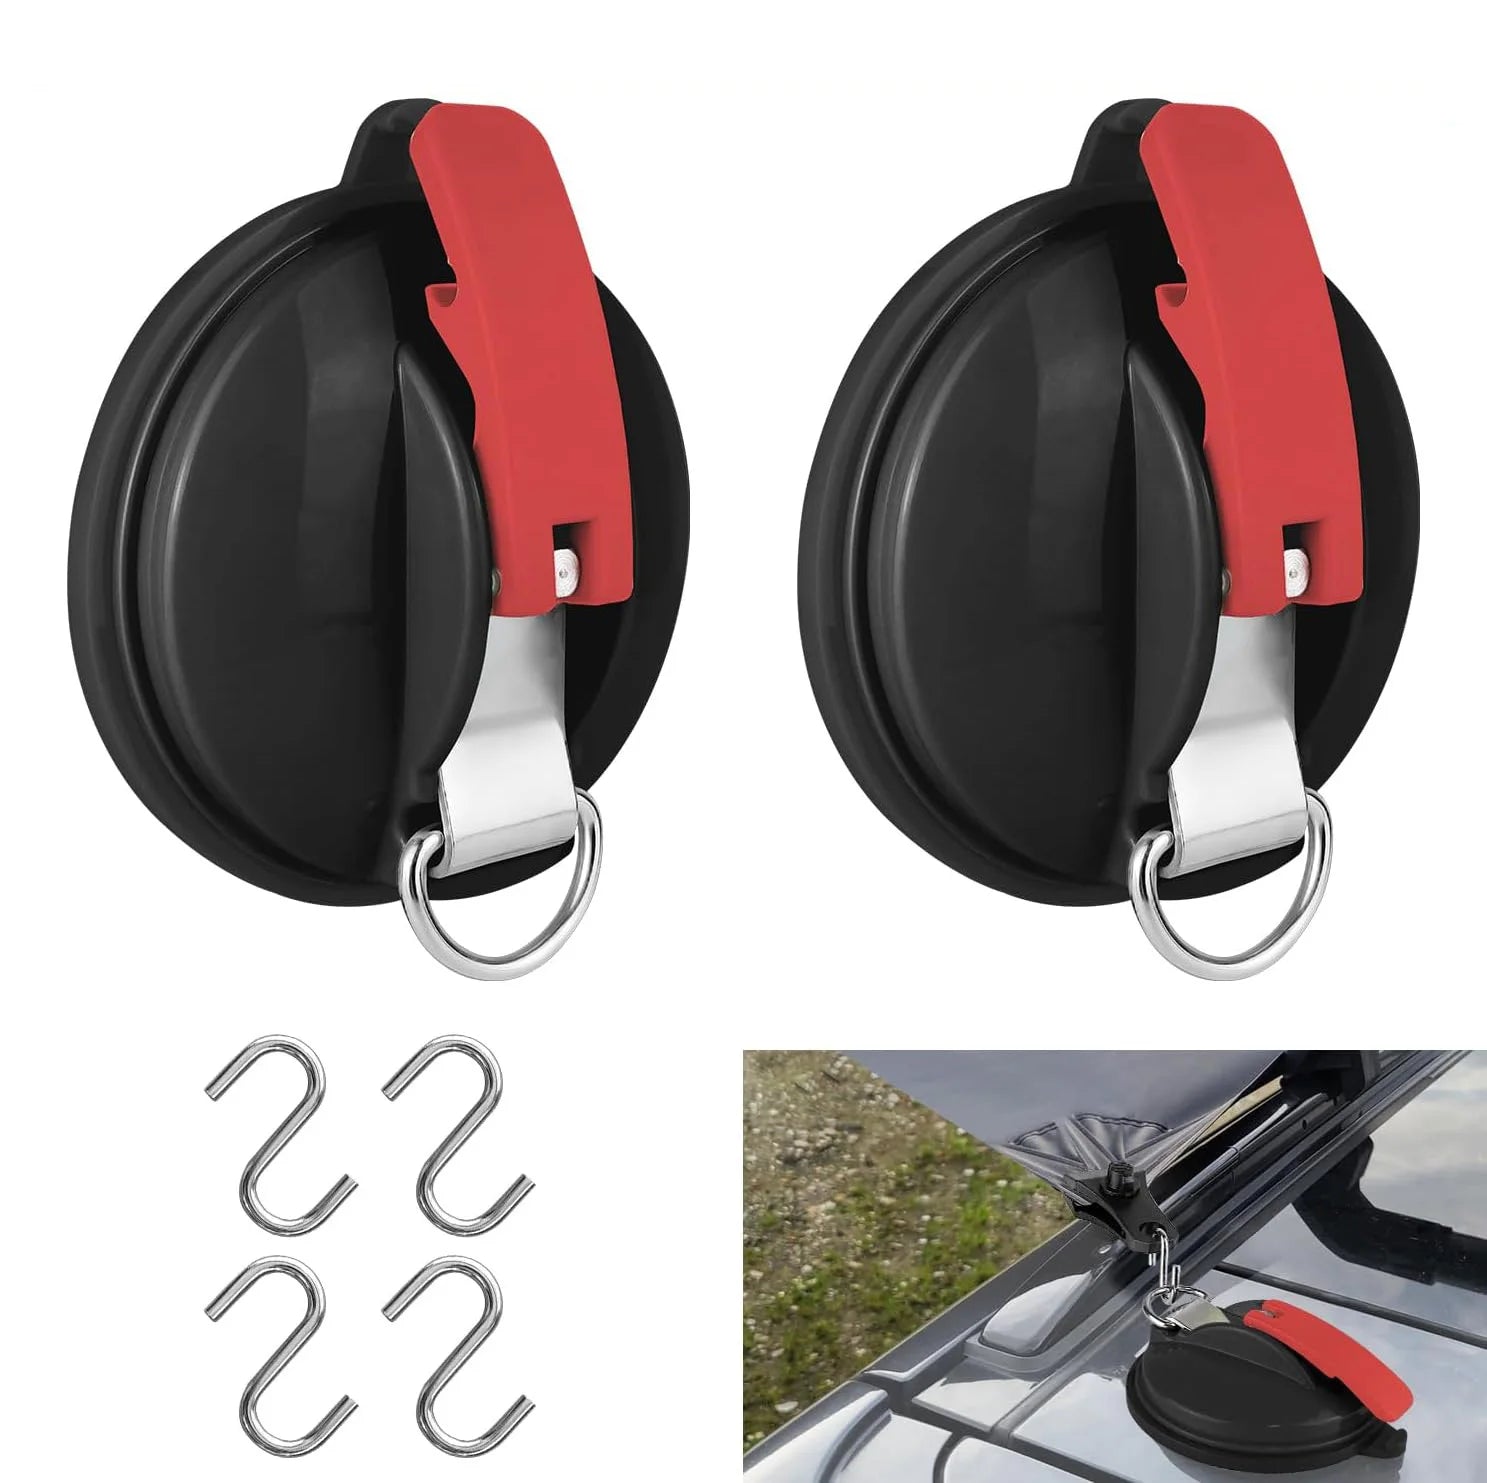 Vacuum suction cup set for car side awning and outdoor camping accessories